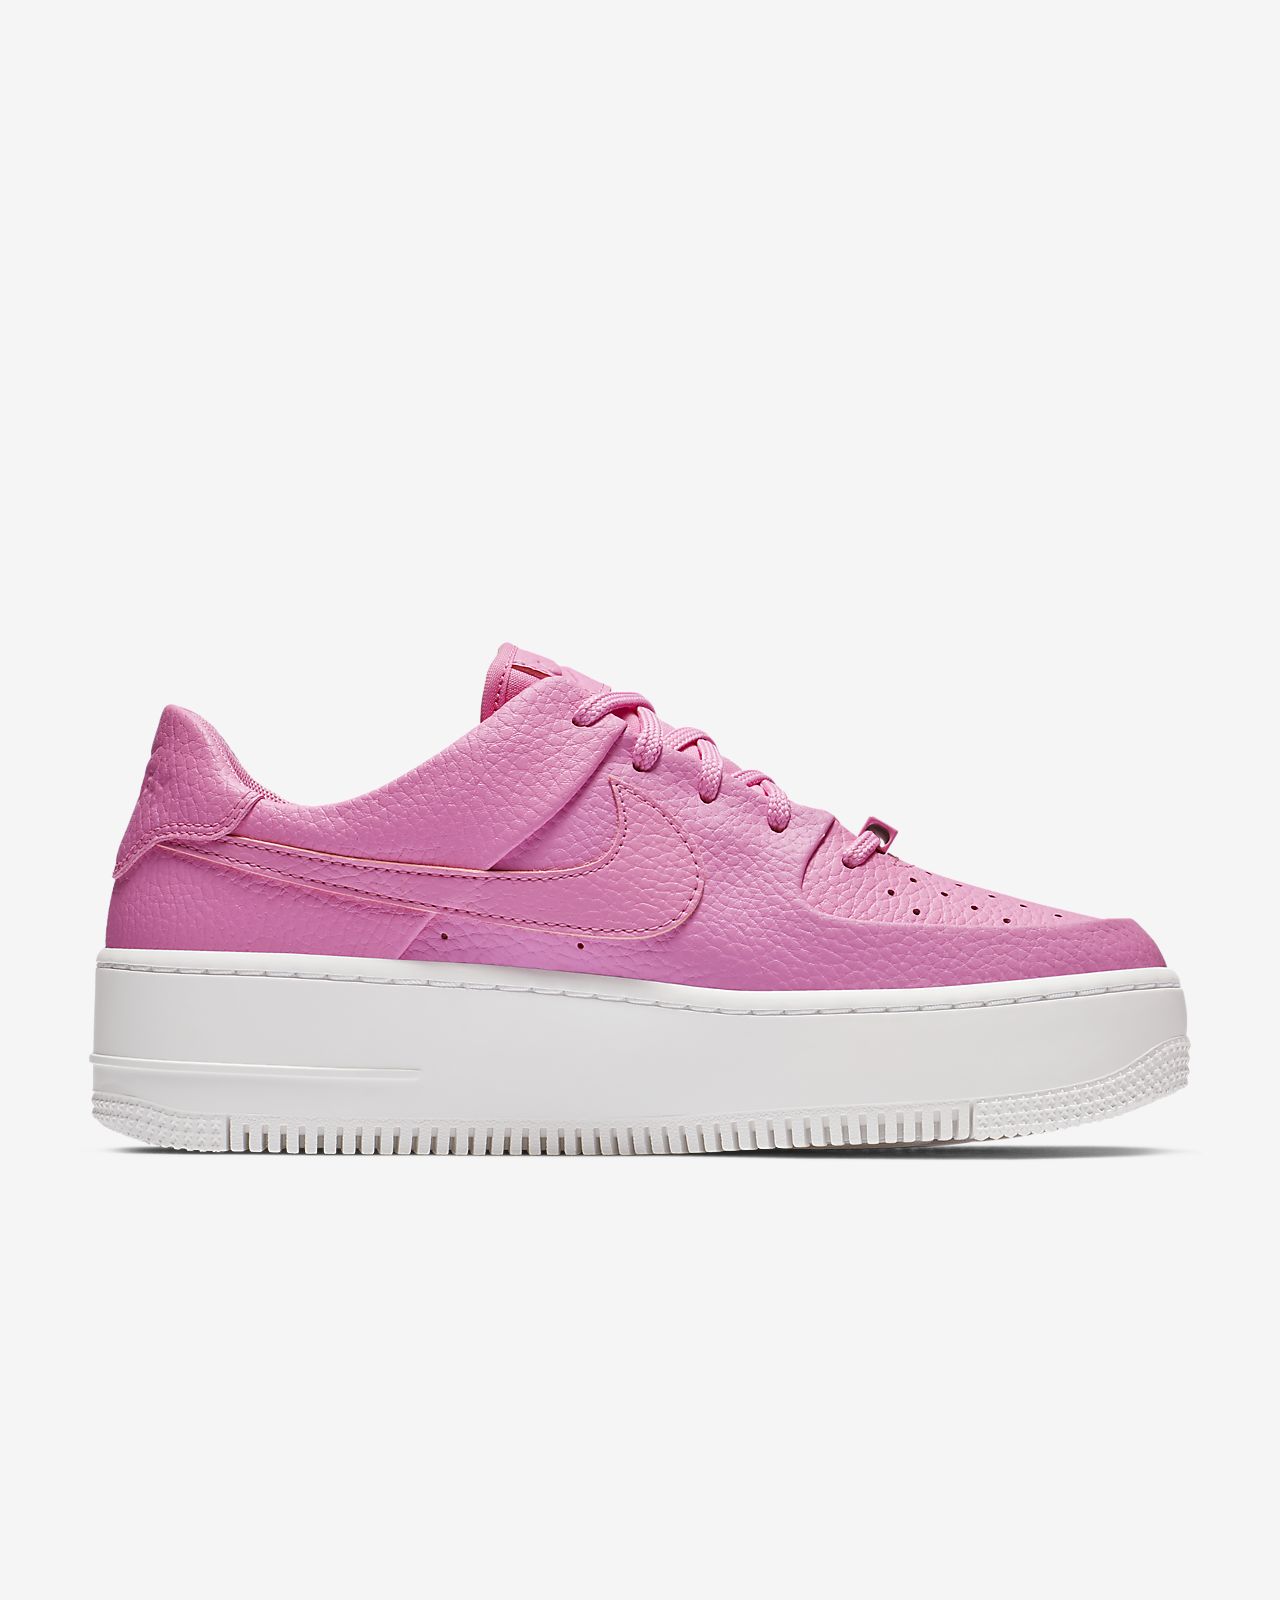 Women's Shoes Clothing, Shoes & Accessories Nike Wmns AF1 Sage Low Air ...